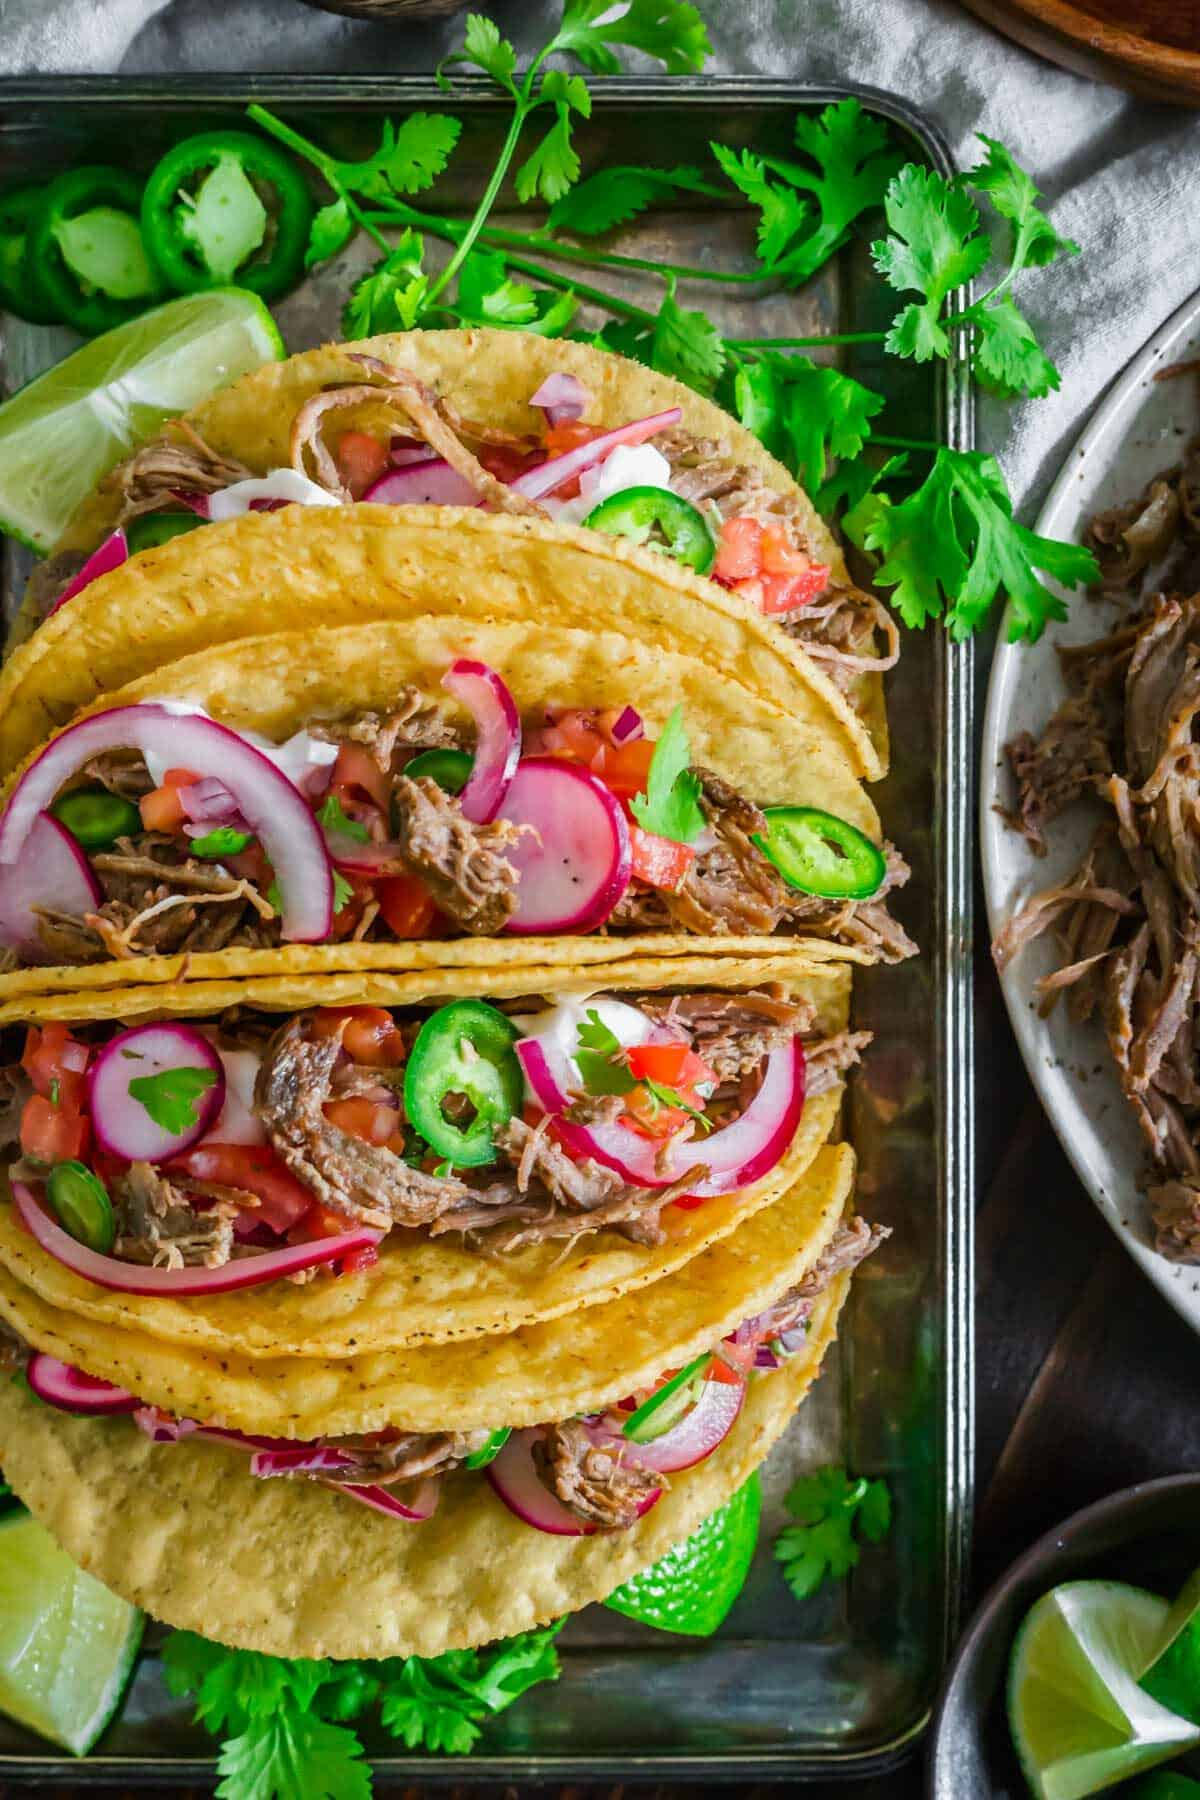 Lamb tacos with toppings in hard taco shells.